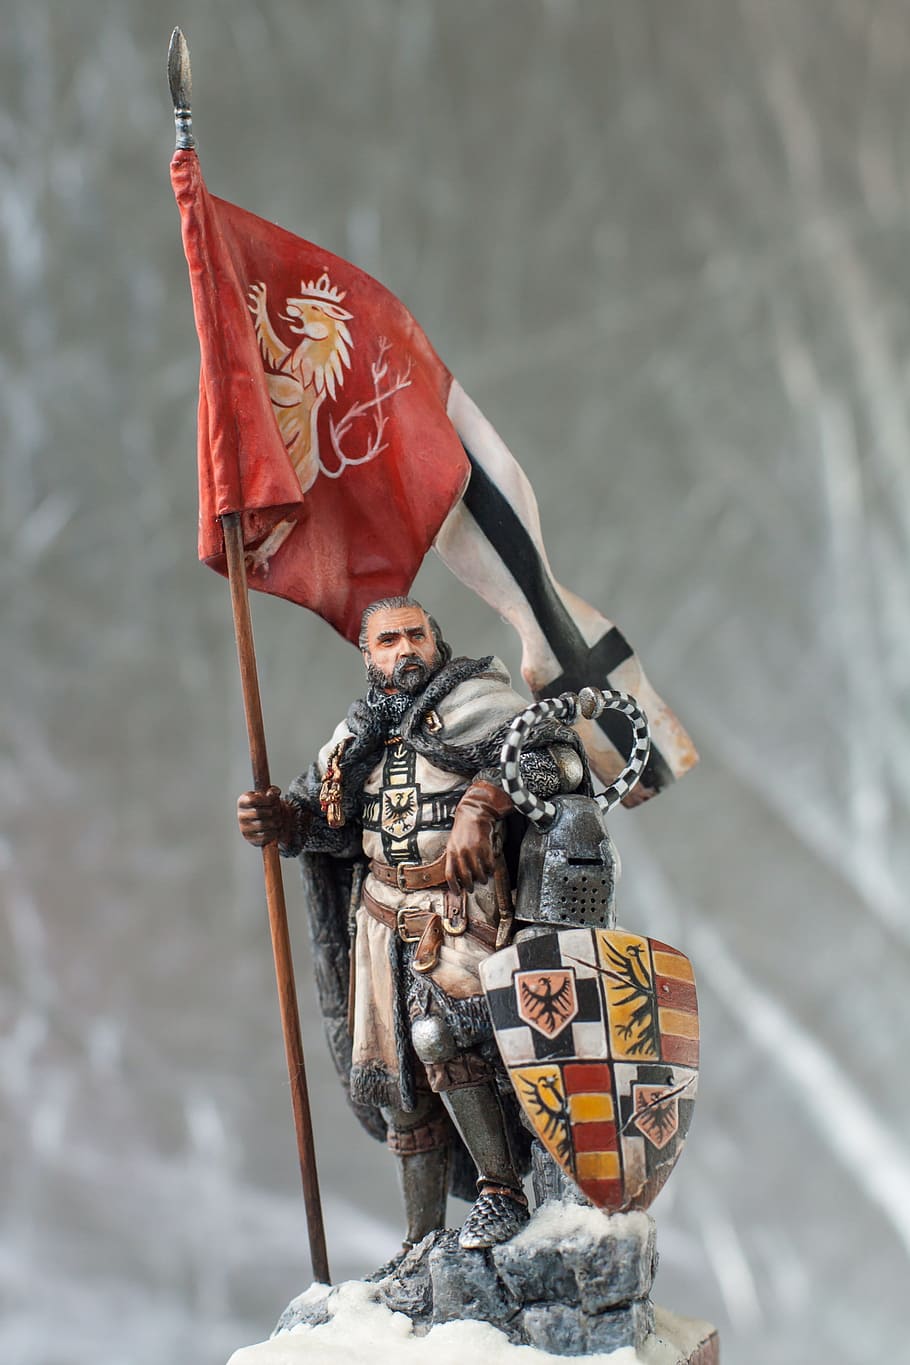 Knight, Figurine, Flag, Banner, Armor, statuette, the middle ages, coat of arms, shield, sword